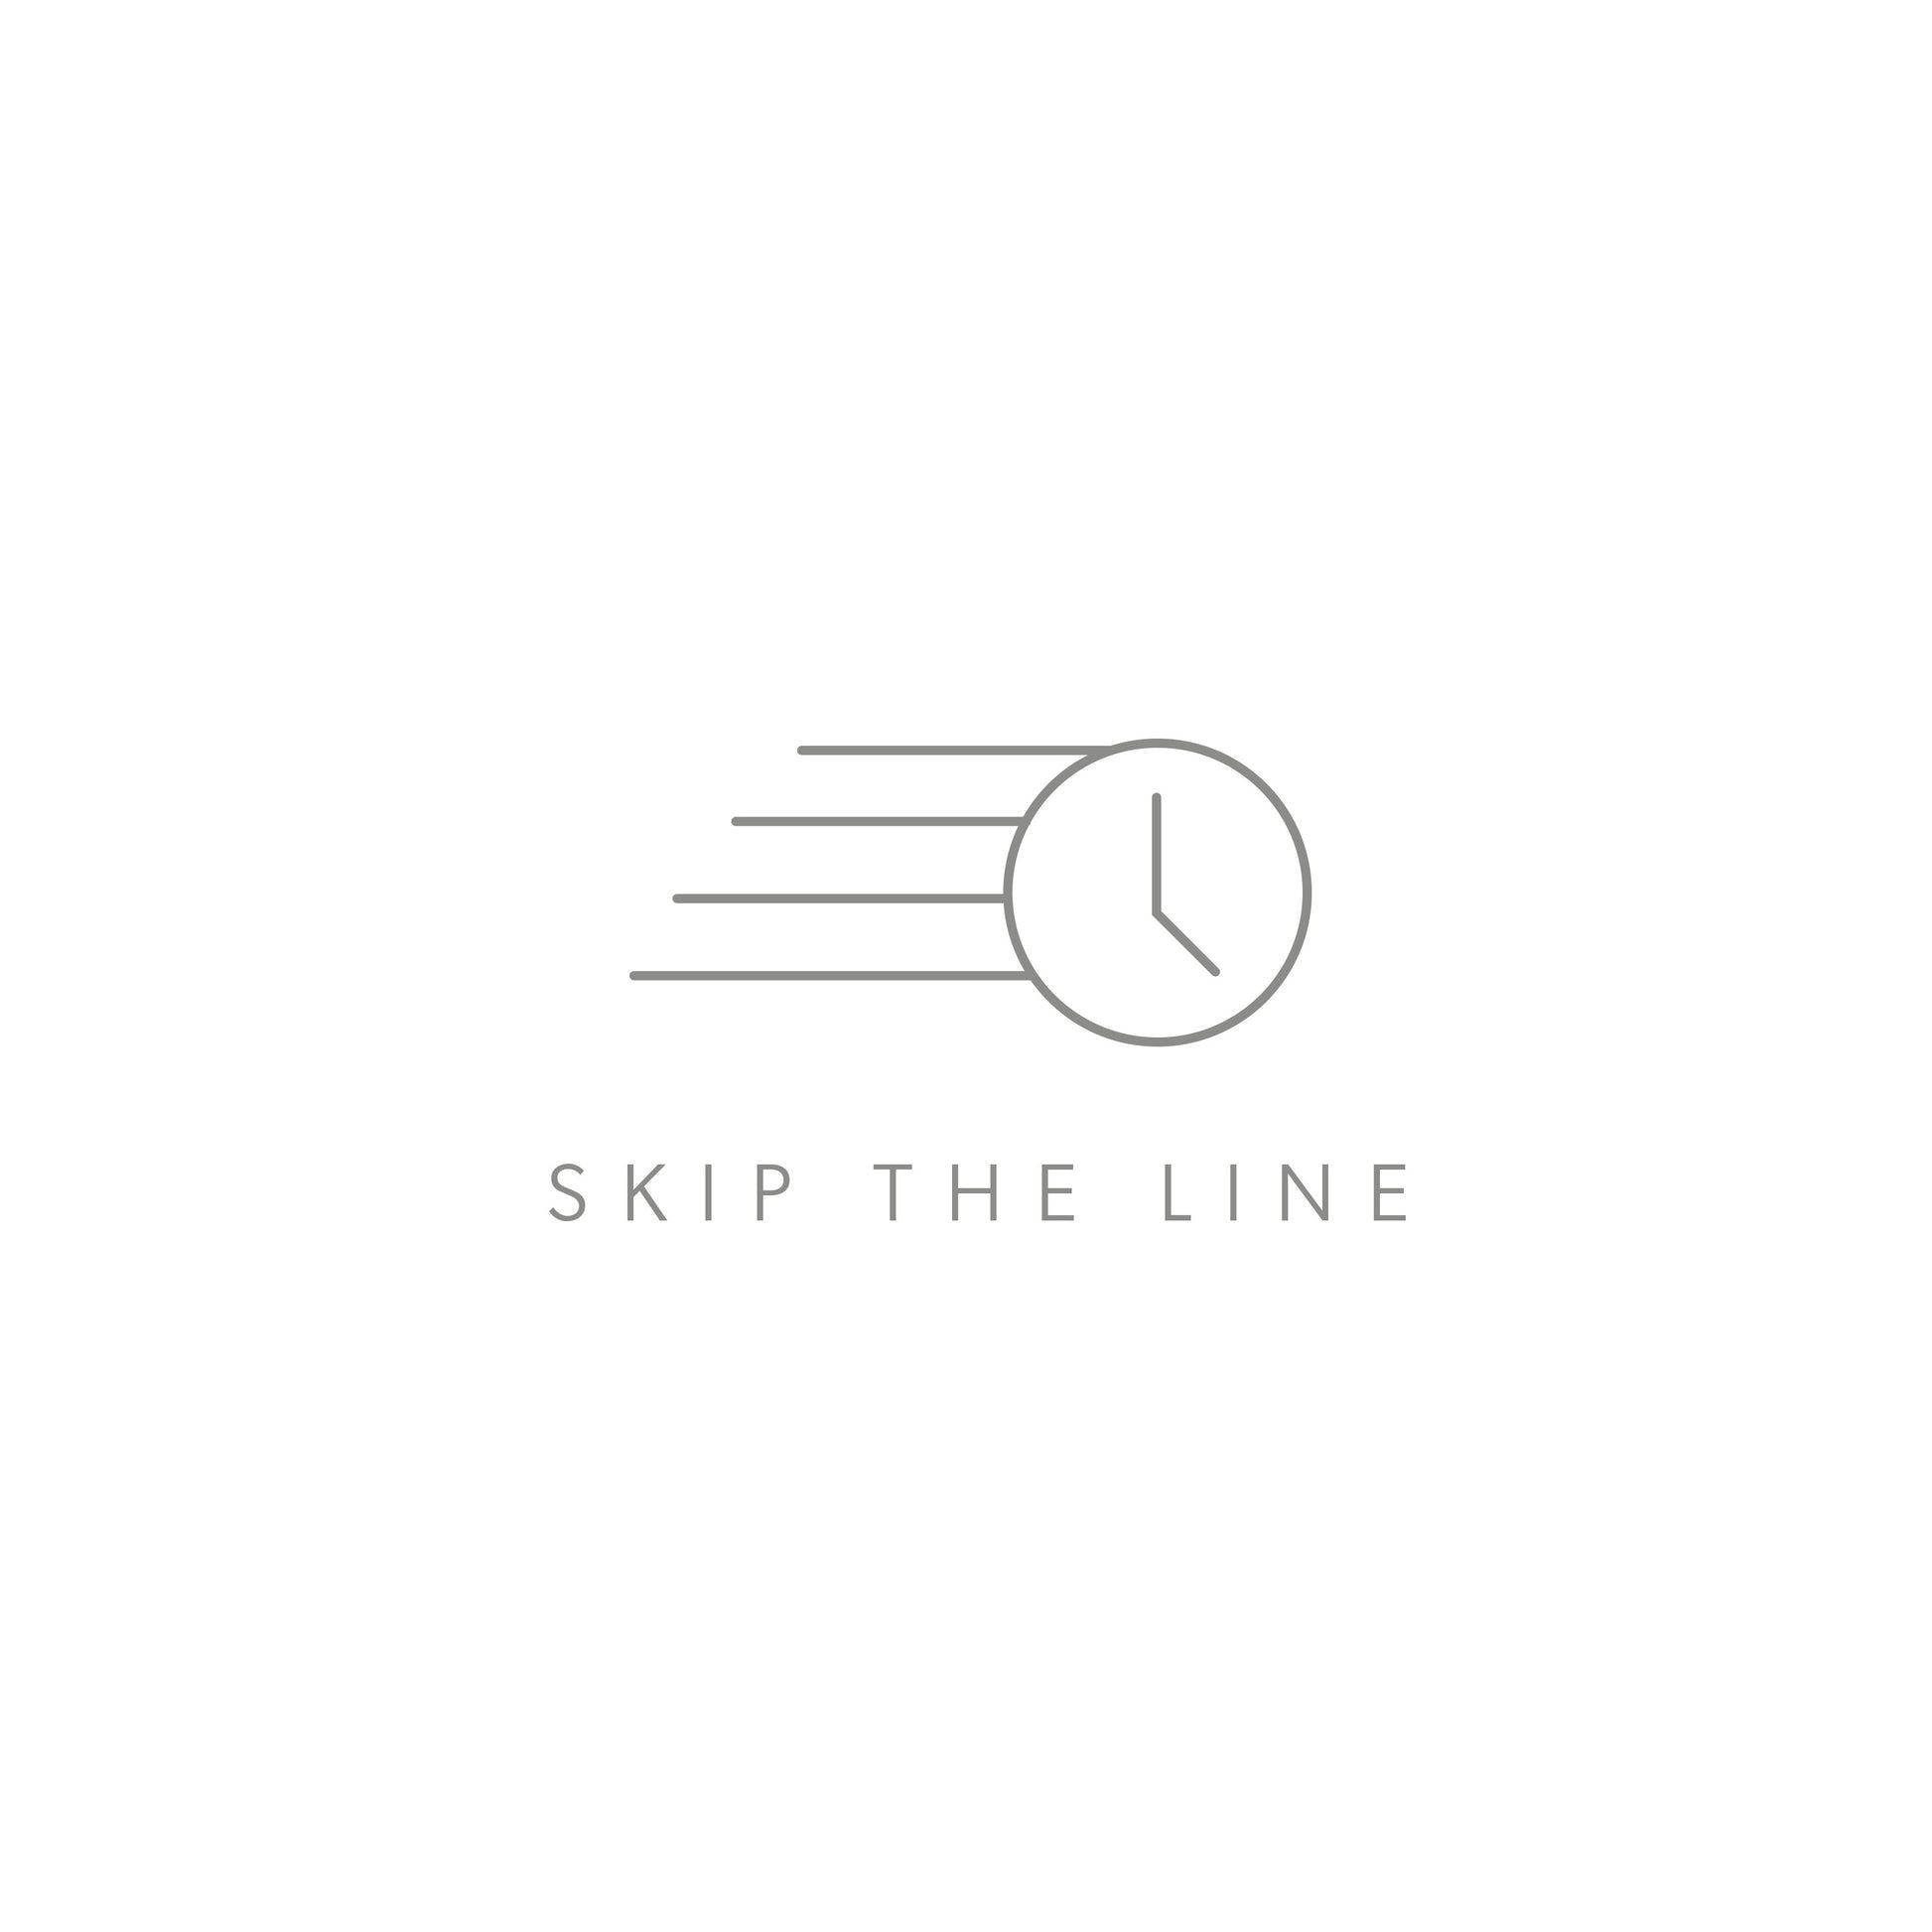 Skip The Line - Get your order shipped before anyone else